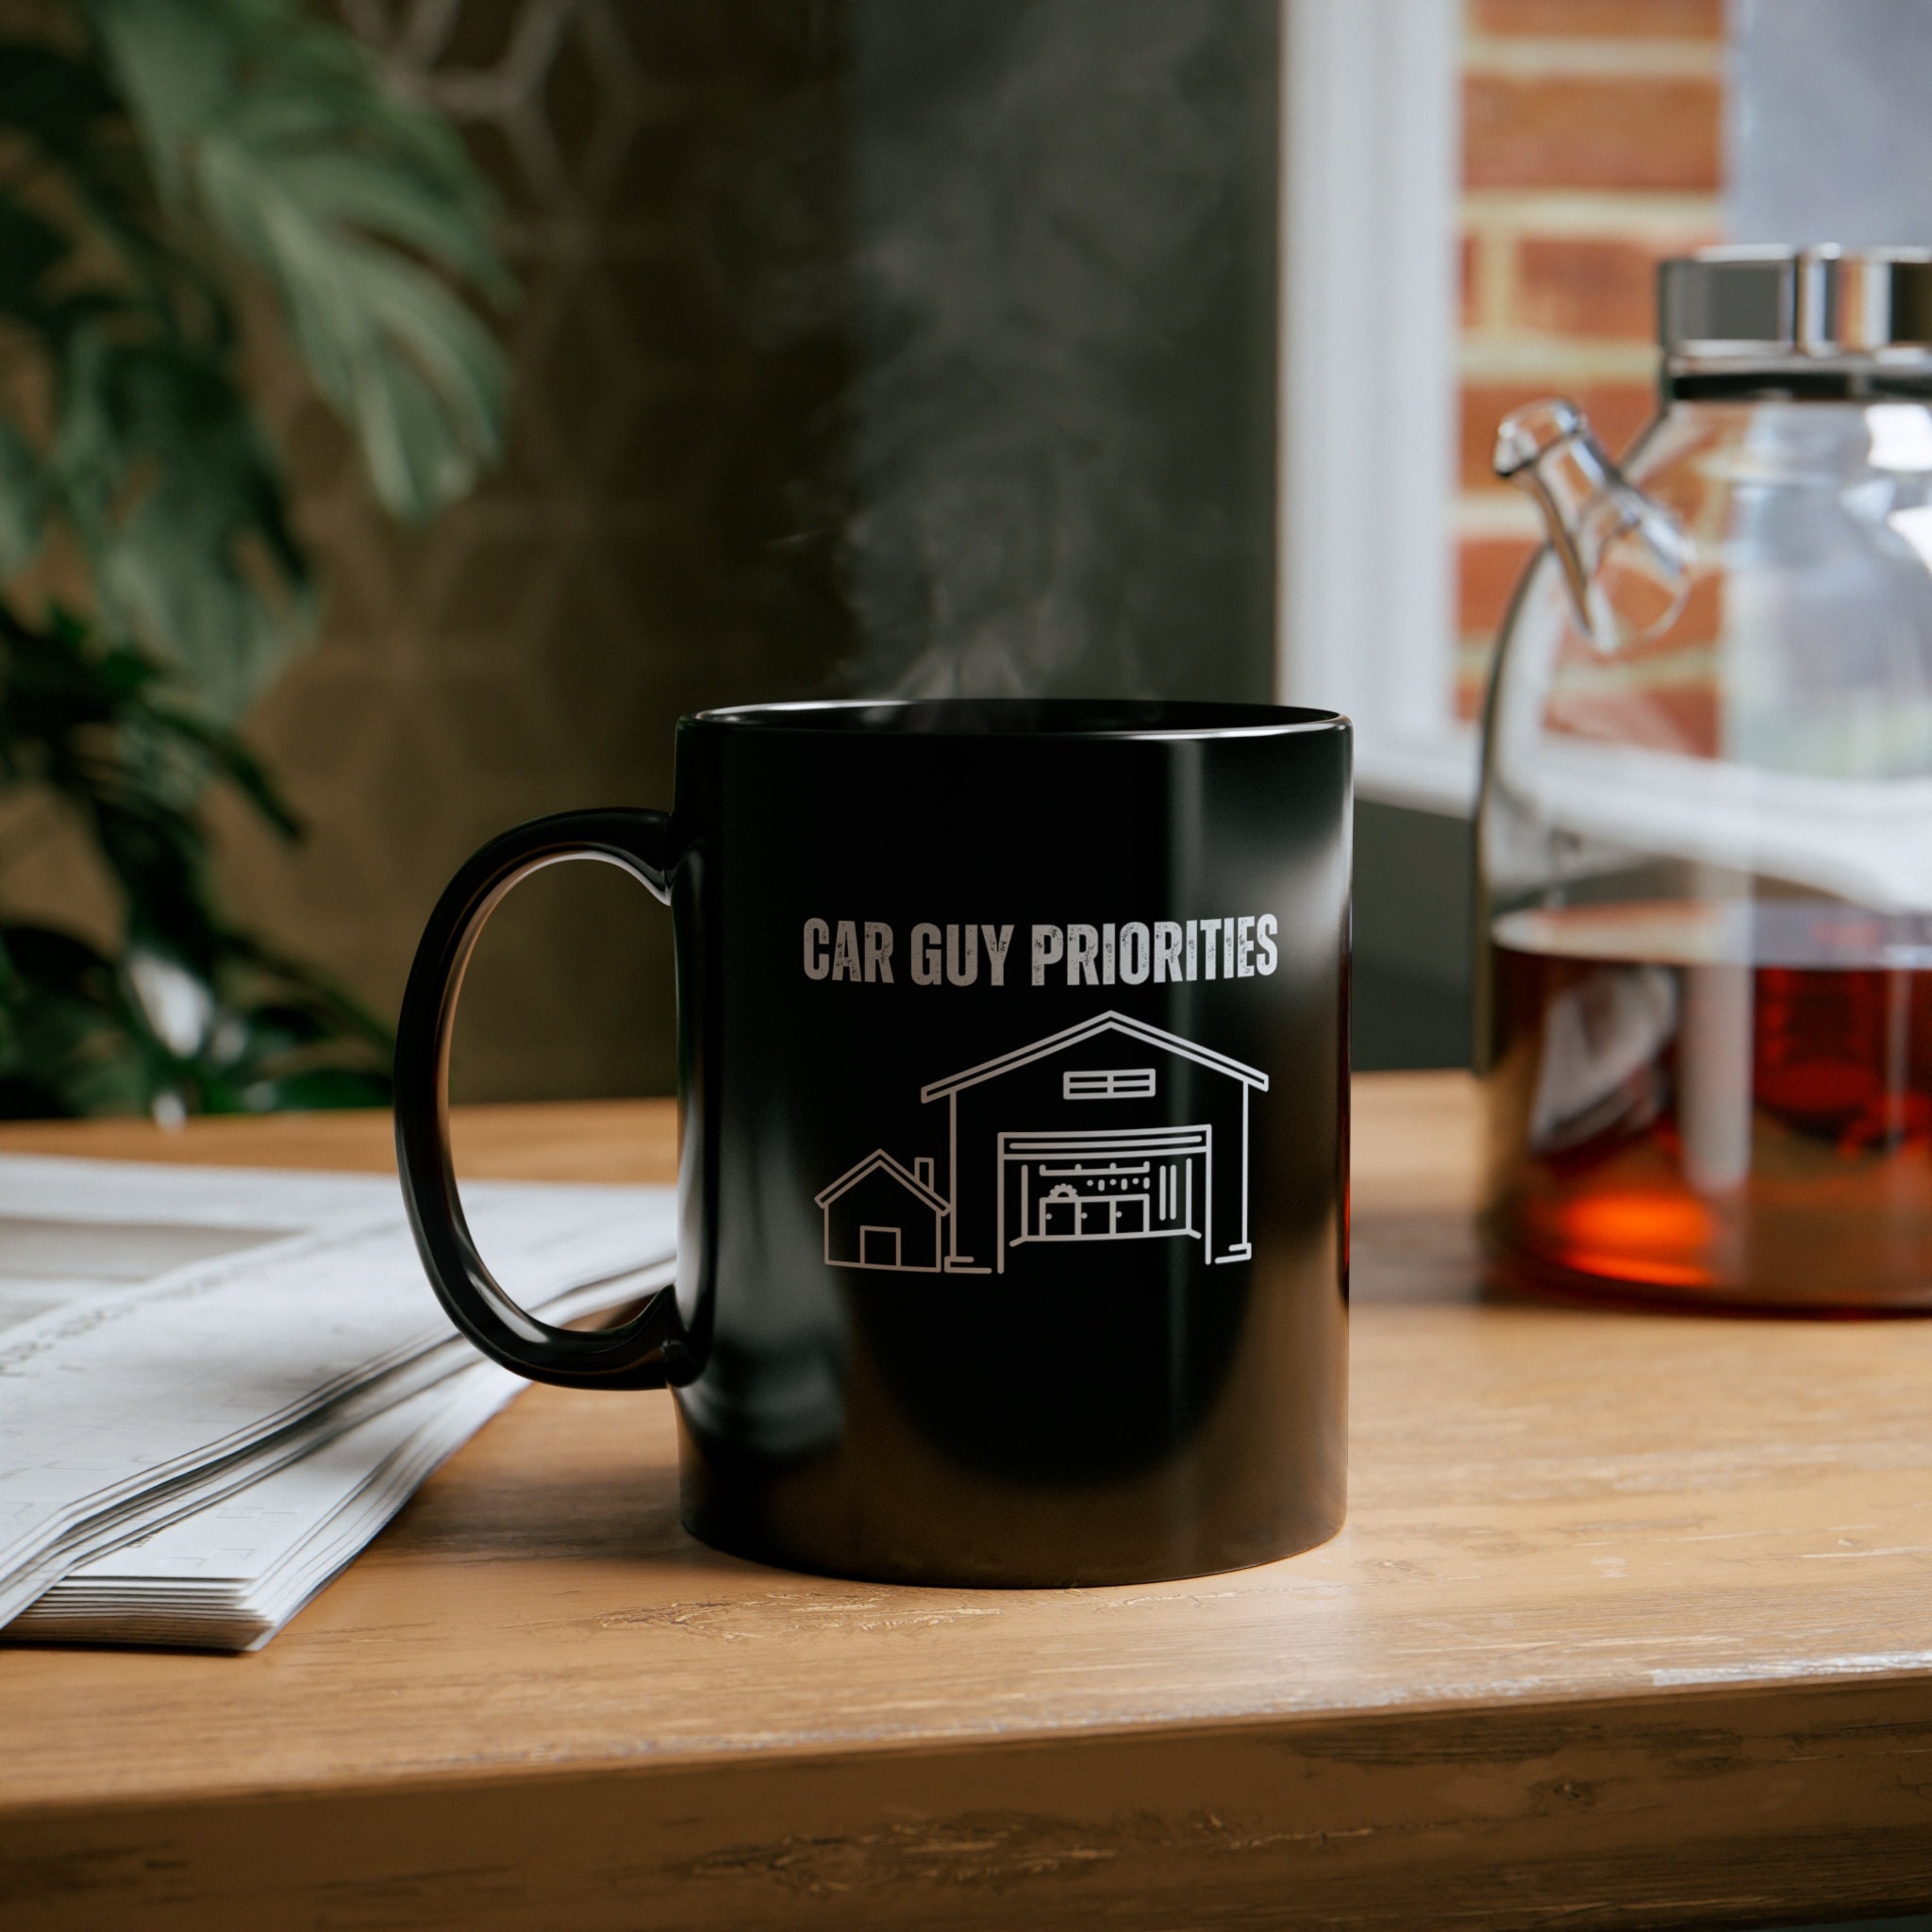 Car Guy Funny Coffee Mug, Car Guy Gift, Car Lover Gift, Car Enthusiast,  Gifts for Car Guys, Gift for Boyfriend, Gift for Husband, Mechanic 